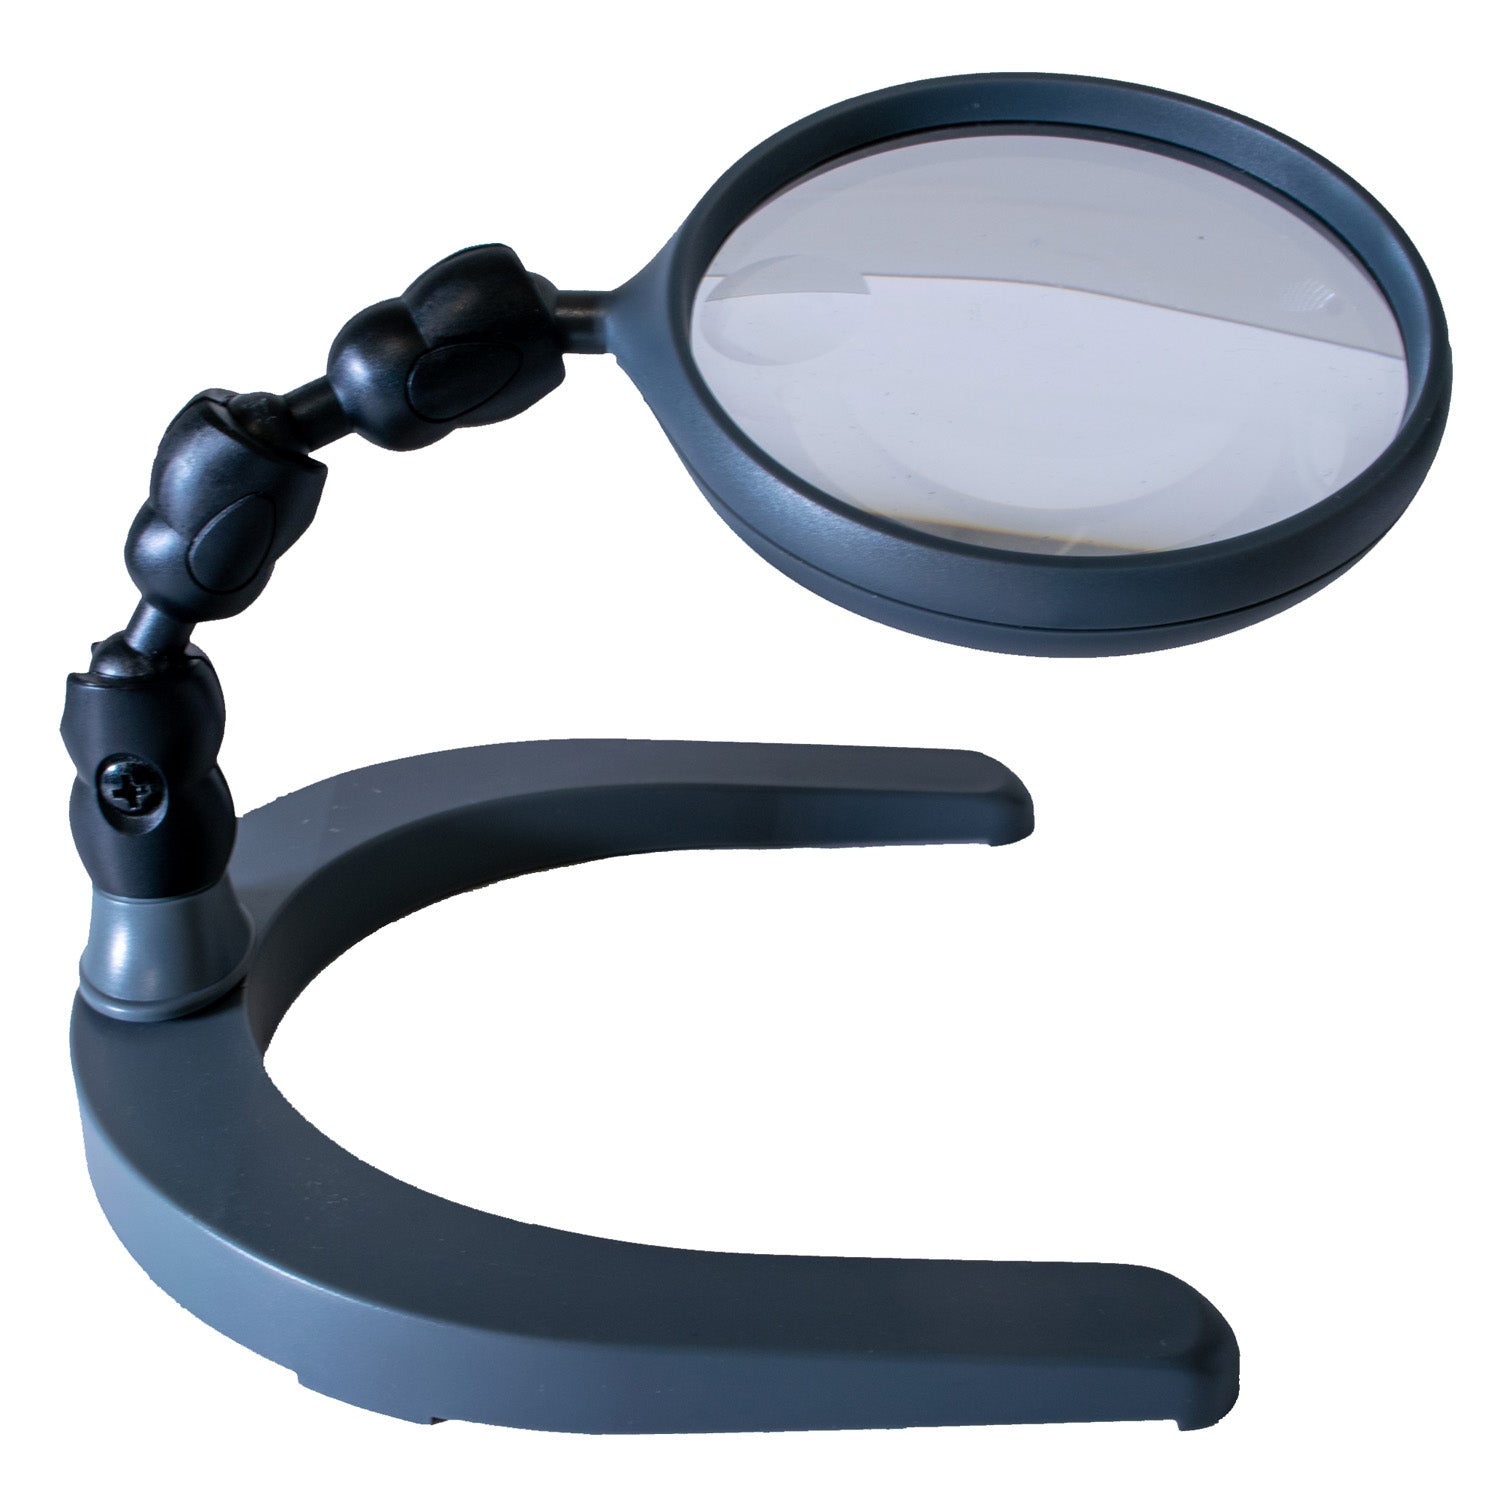 Magnifier on adjustable stand, lens is 2X90